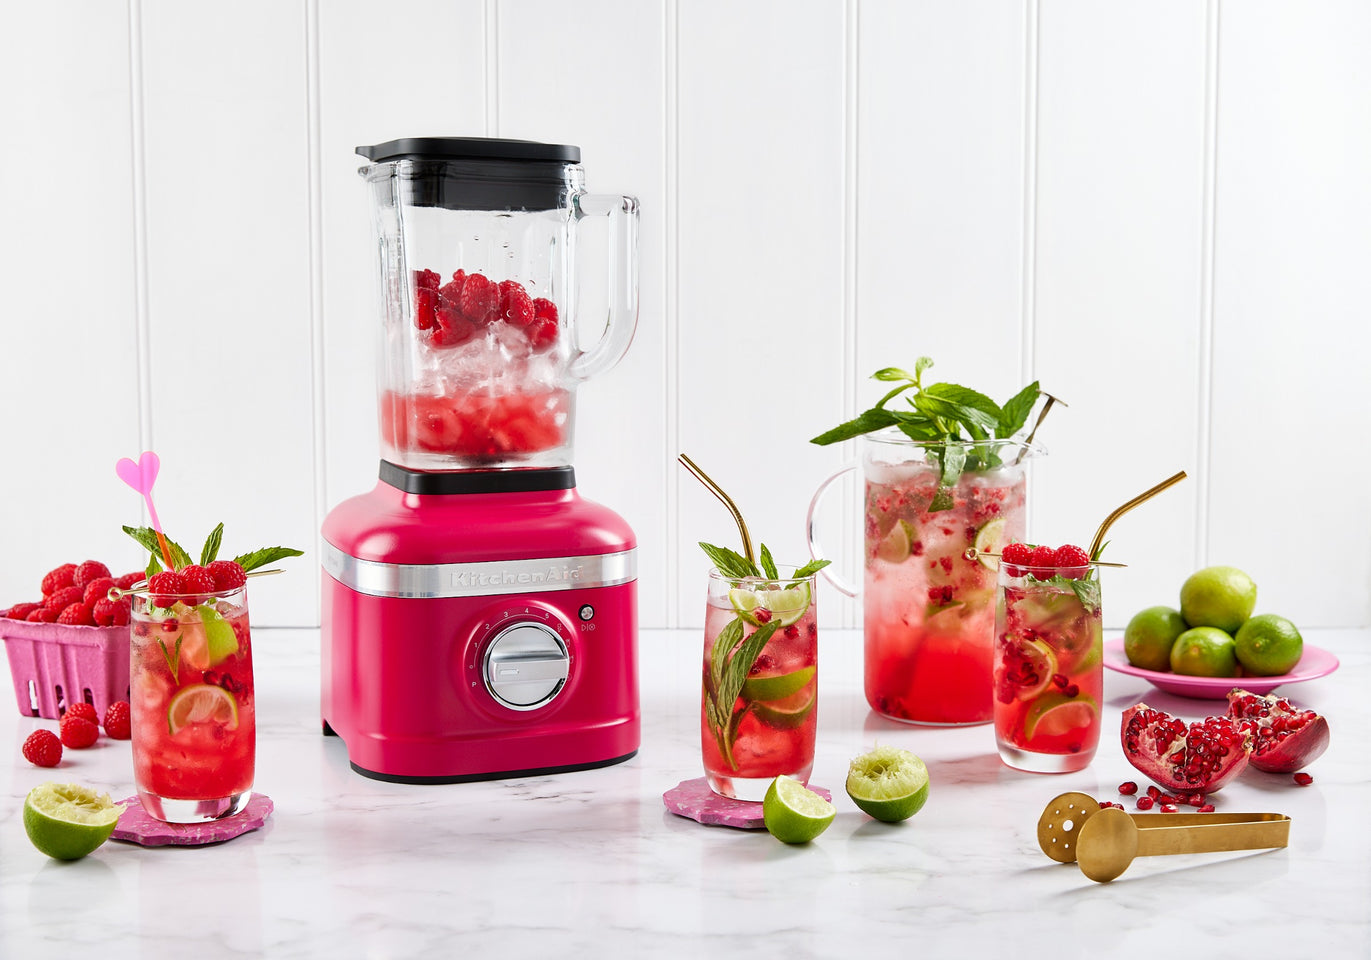 K400 Variable Speed Blender 2023 Colour Of The Year - Hibiscus KSB4026